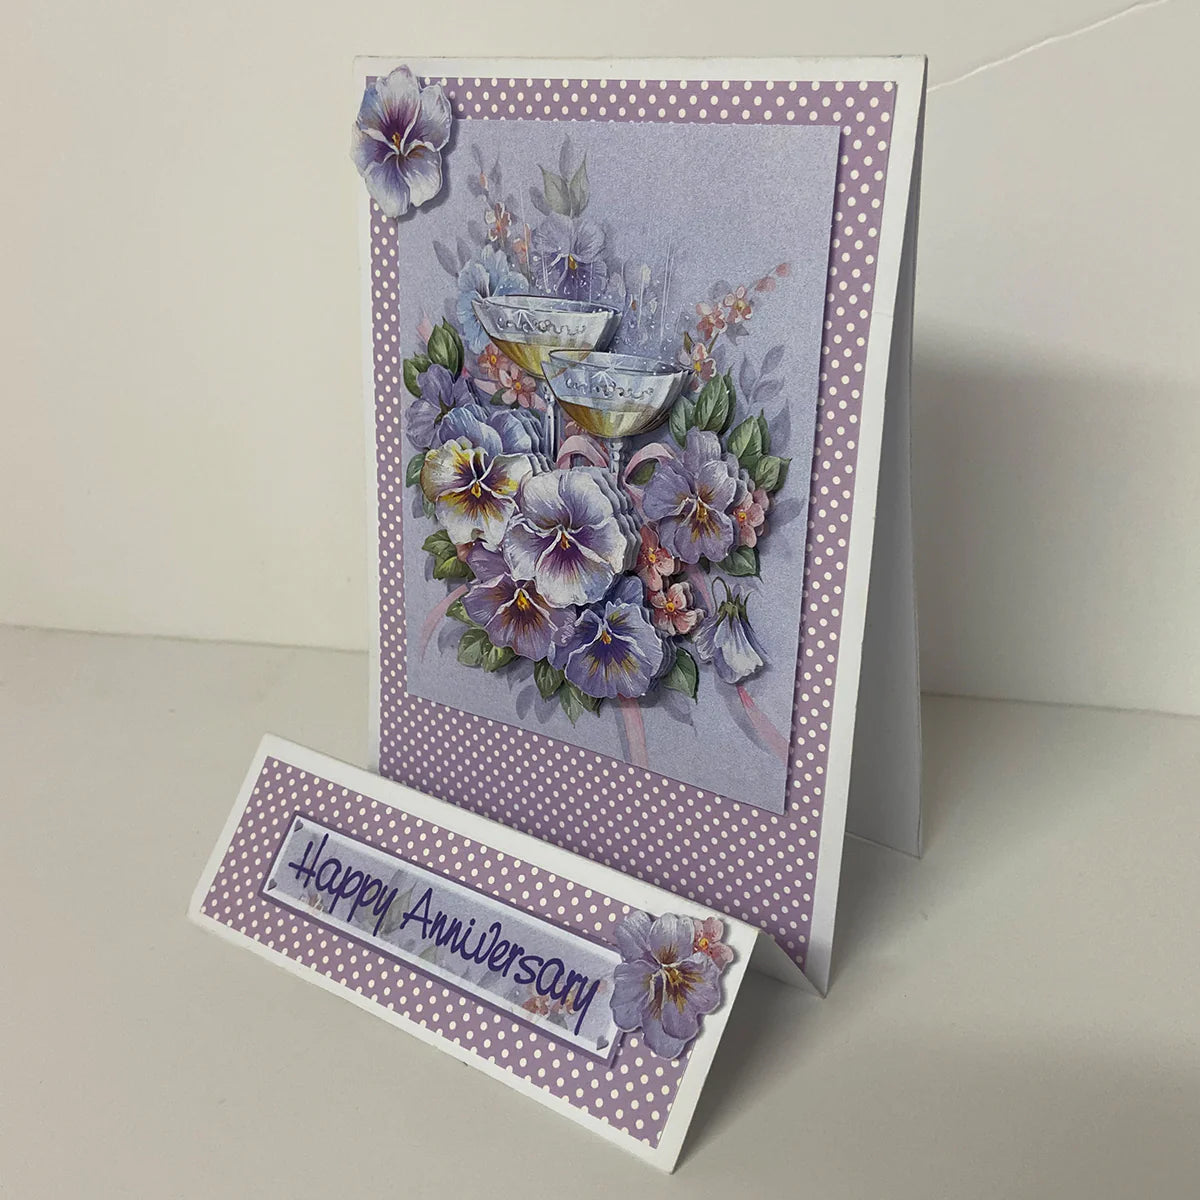 Die Cut Decoupage – Champagne And Violets (Pack Of 3)